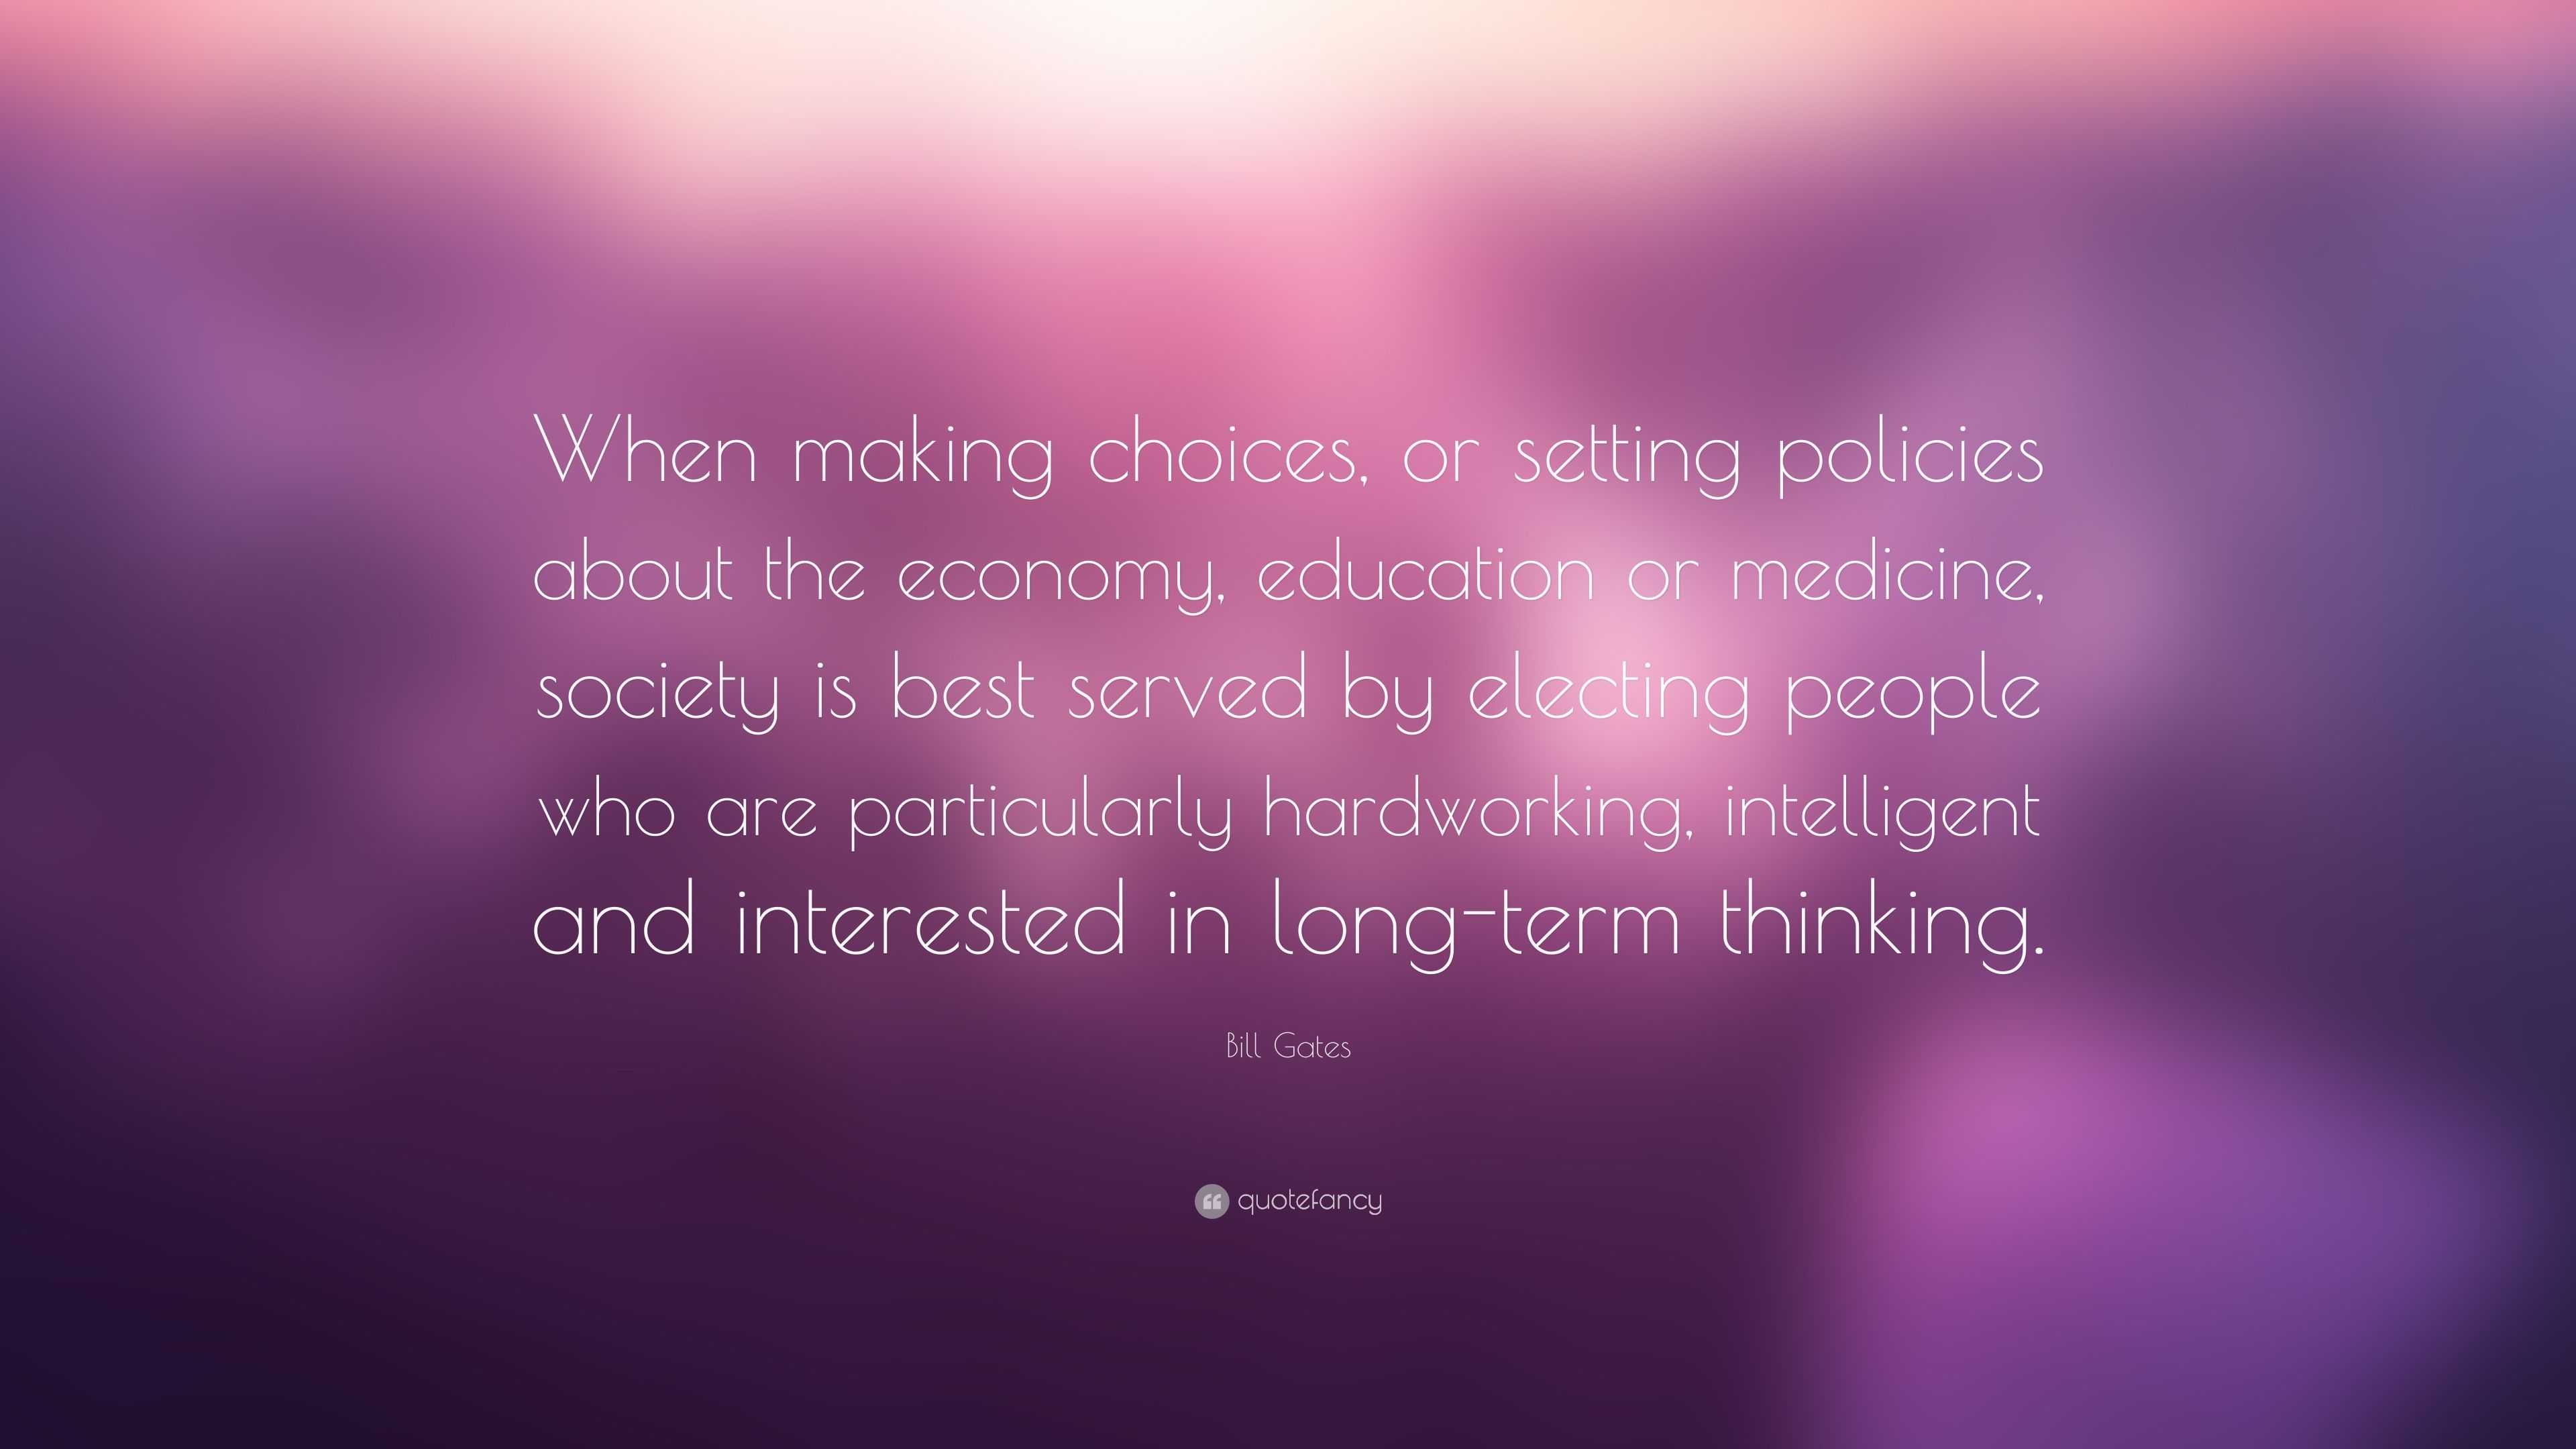 Bill Gates Quote: “When making choices, or setting policies about the ...